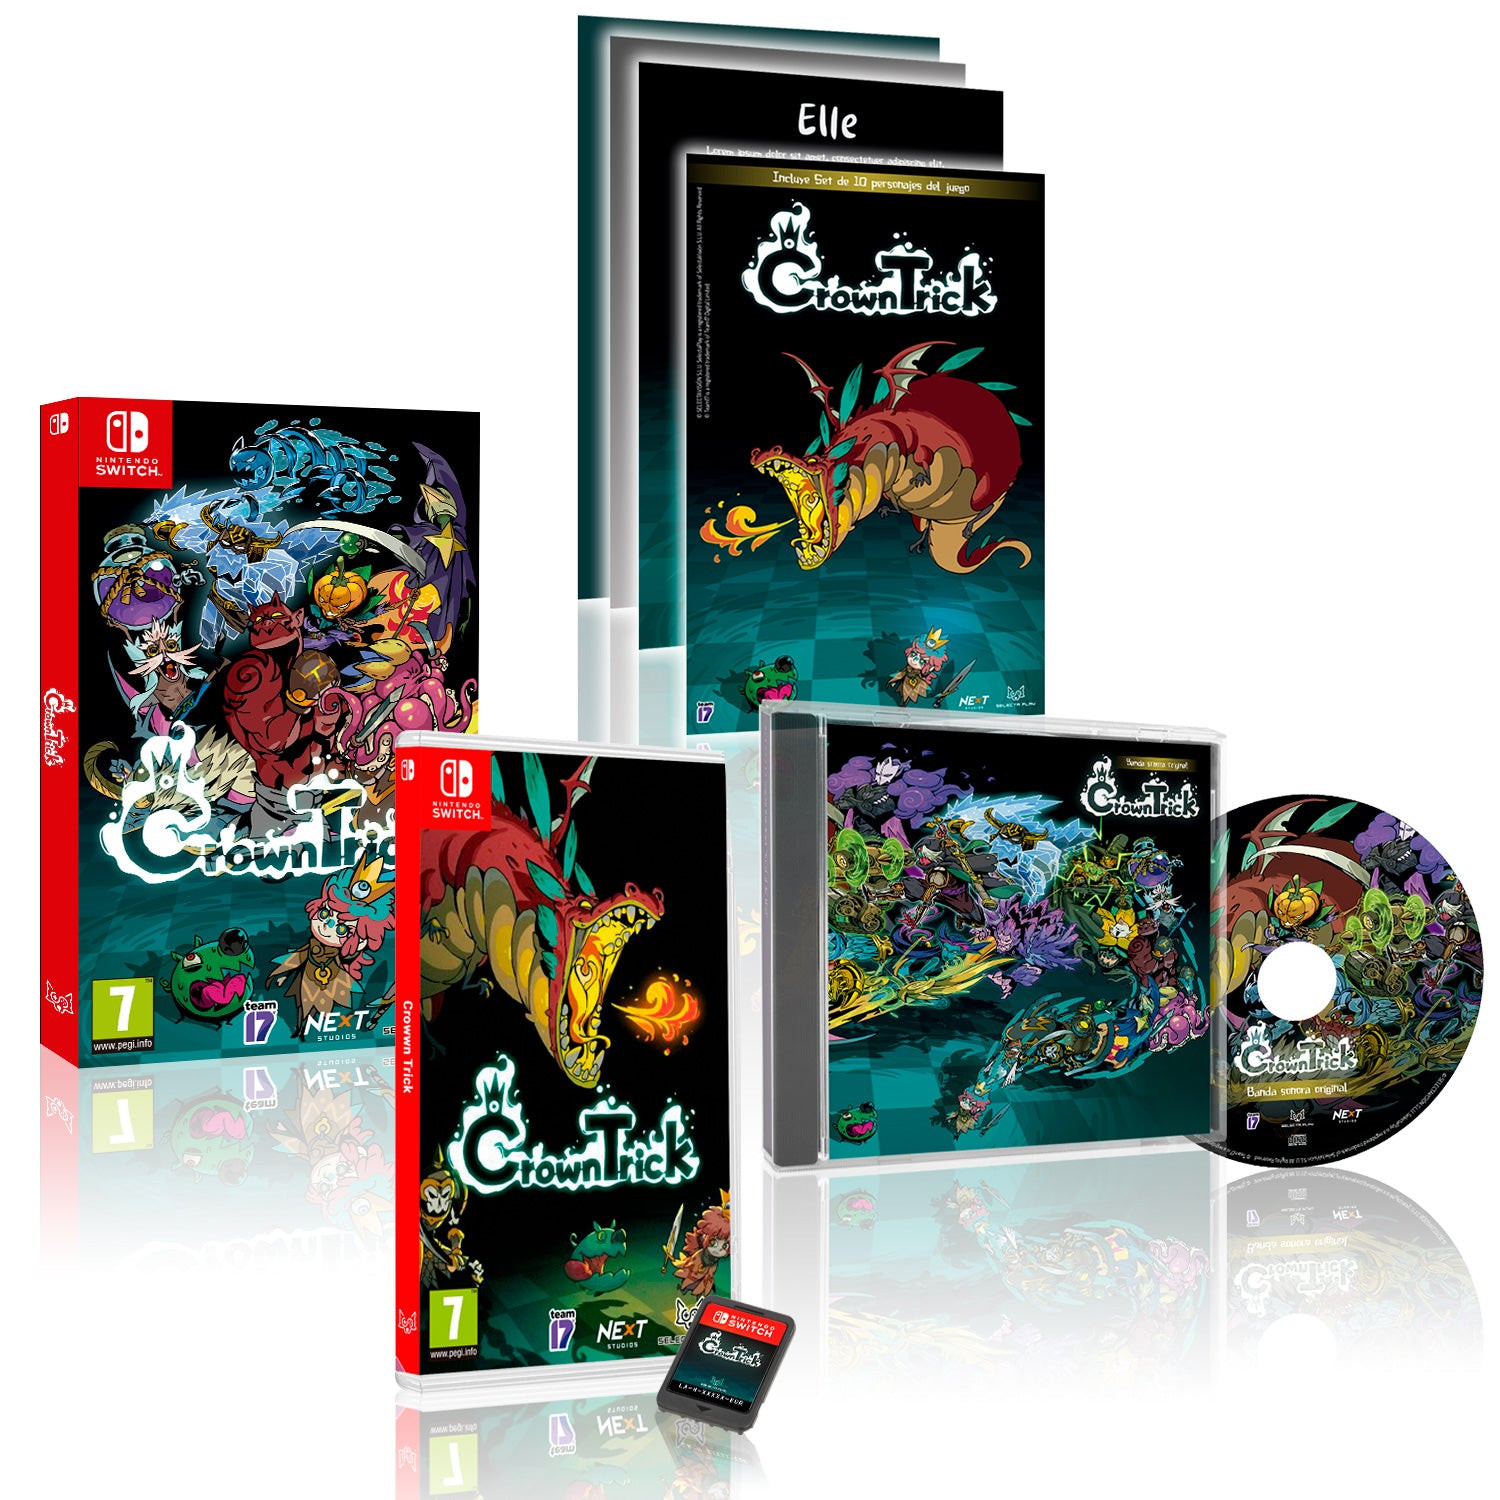 Crown Trick Collector's Edition - Nintendo Switch